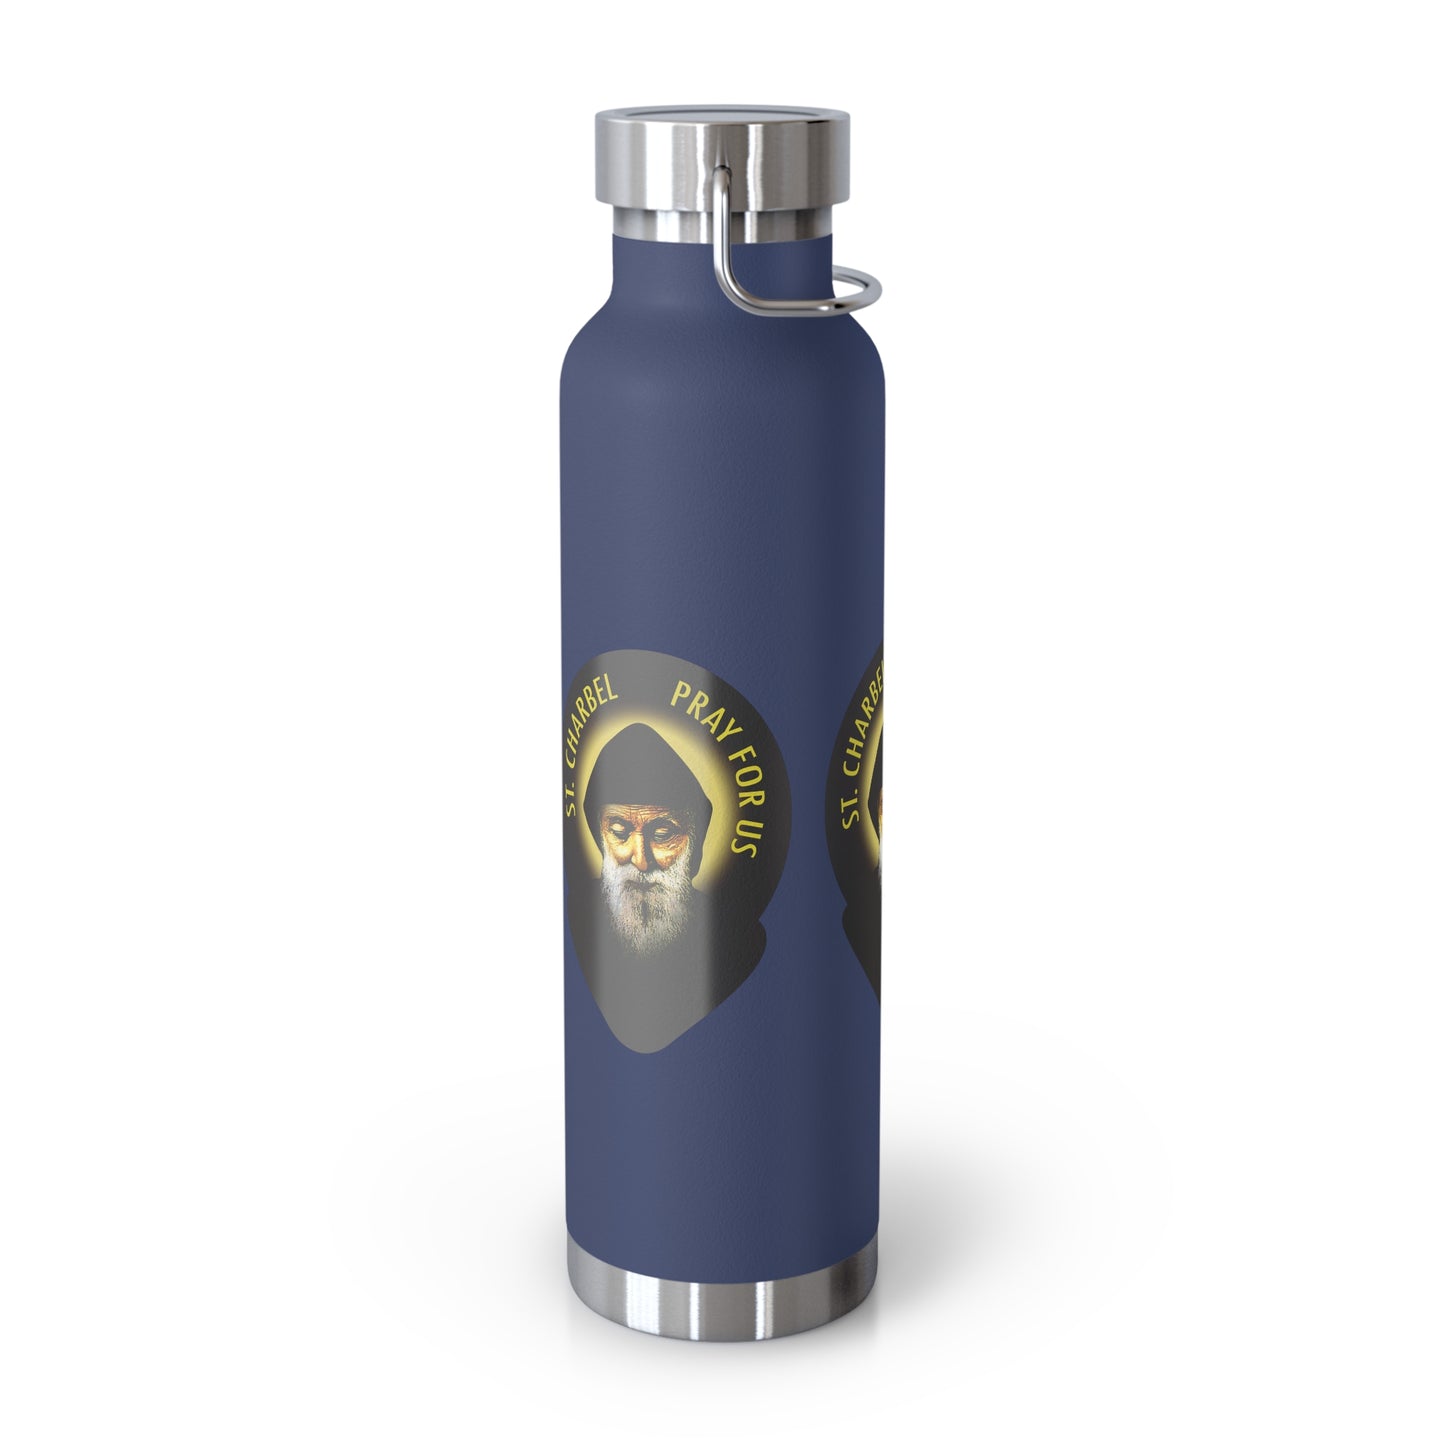 St Charbel Copper Vacuum Insulated Bottle, 22oz